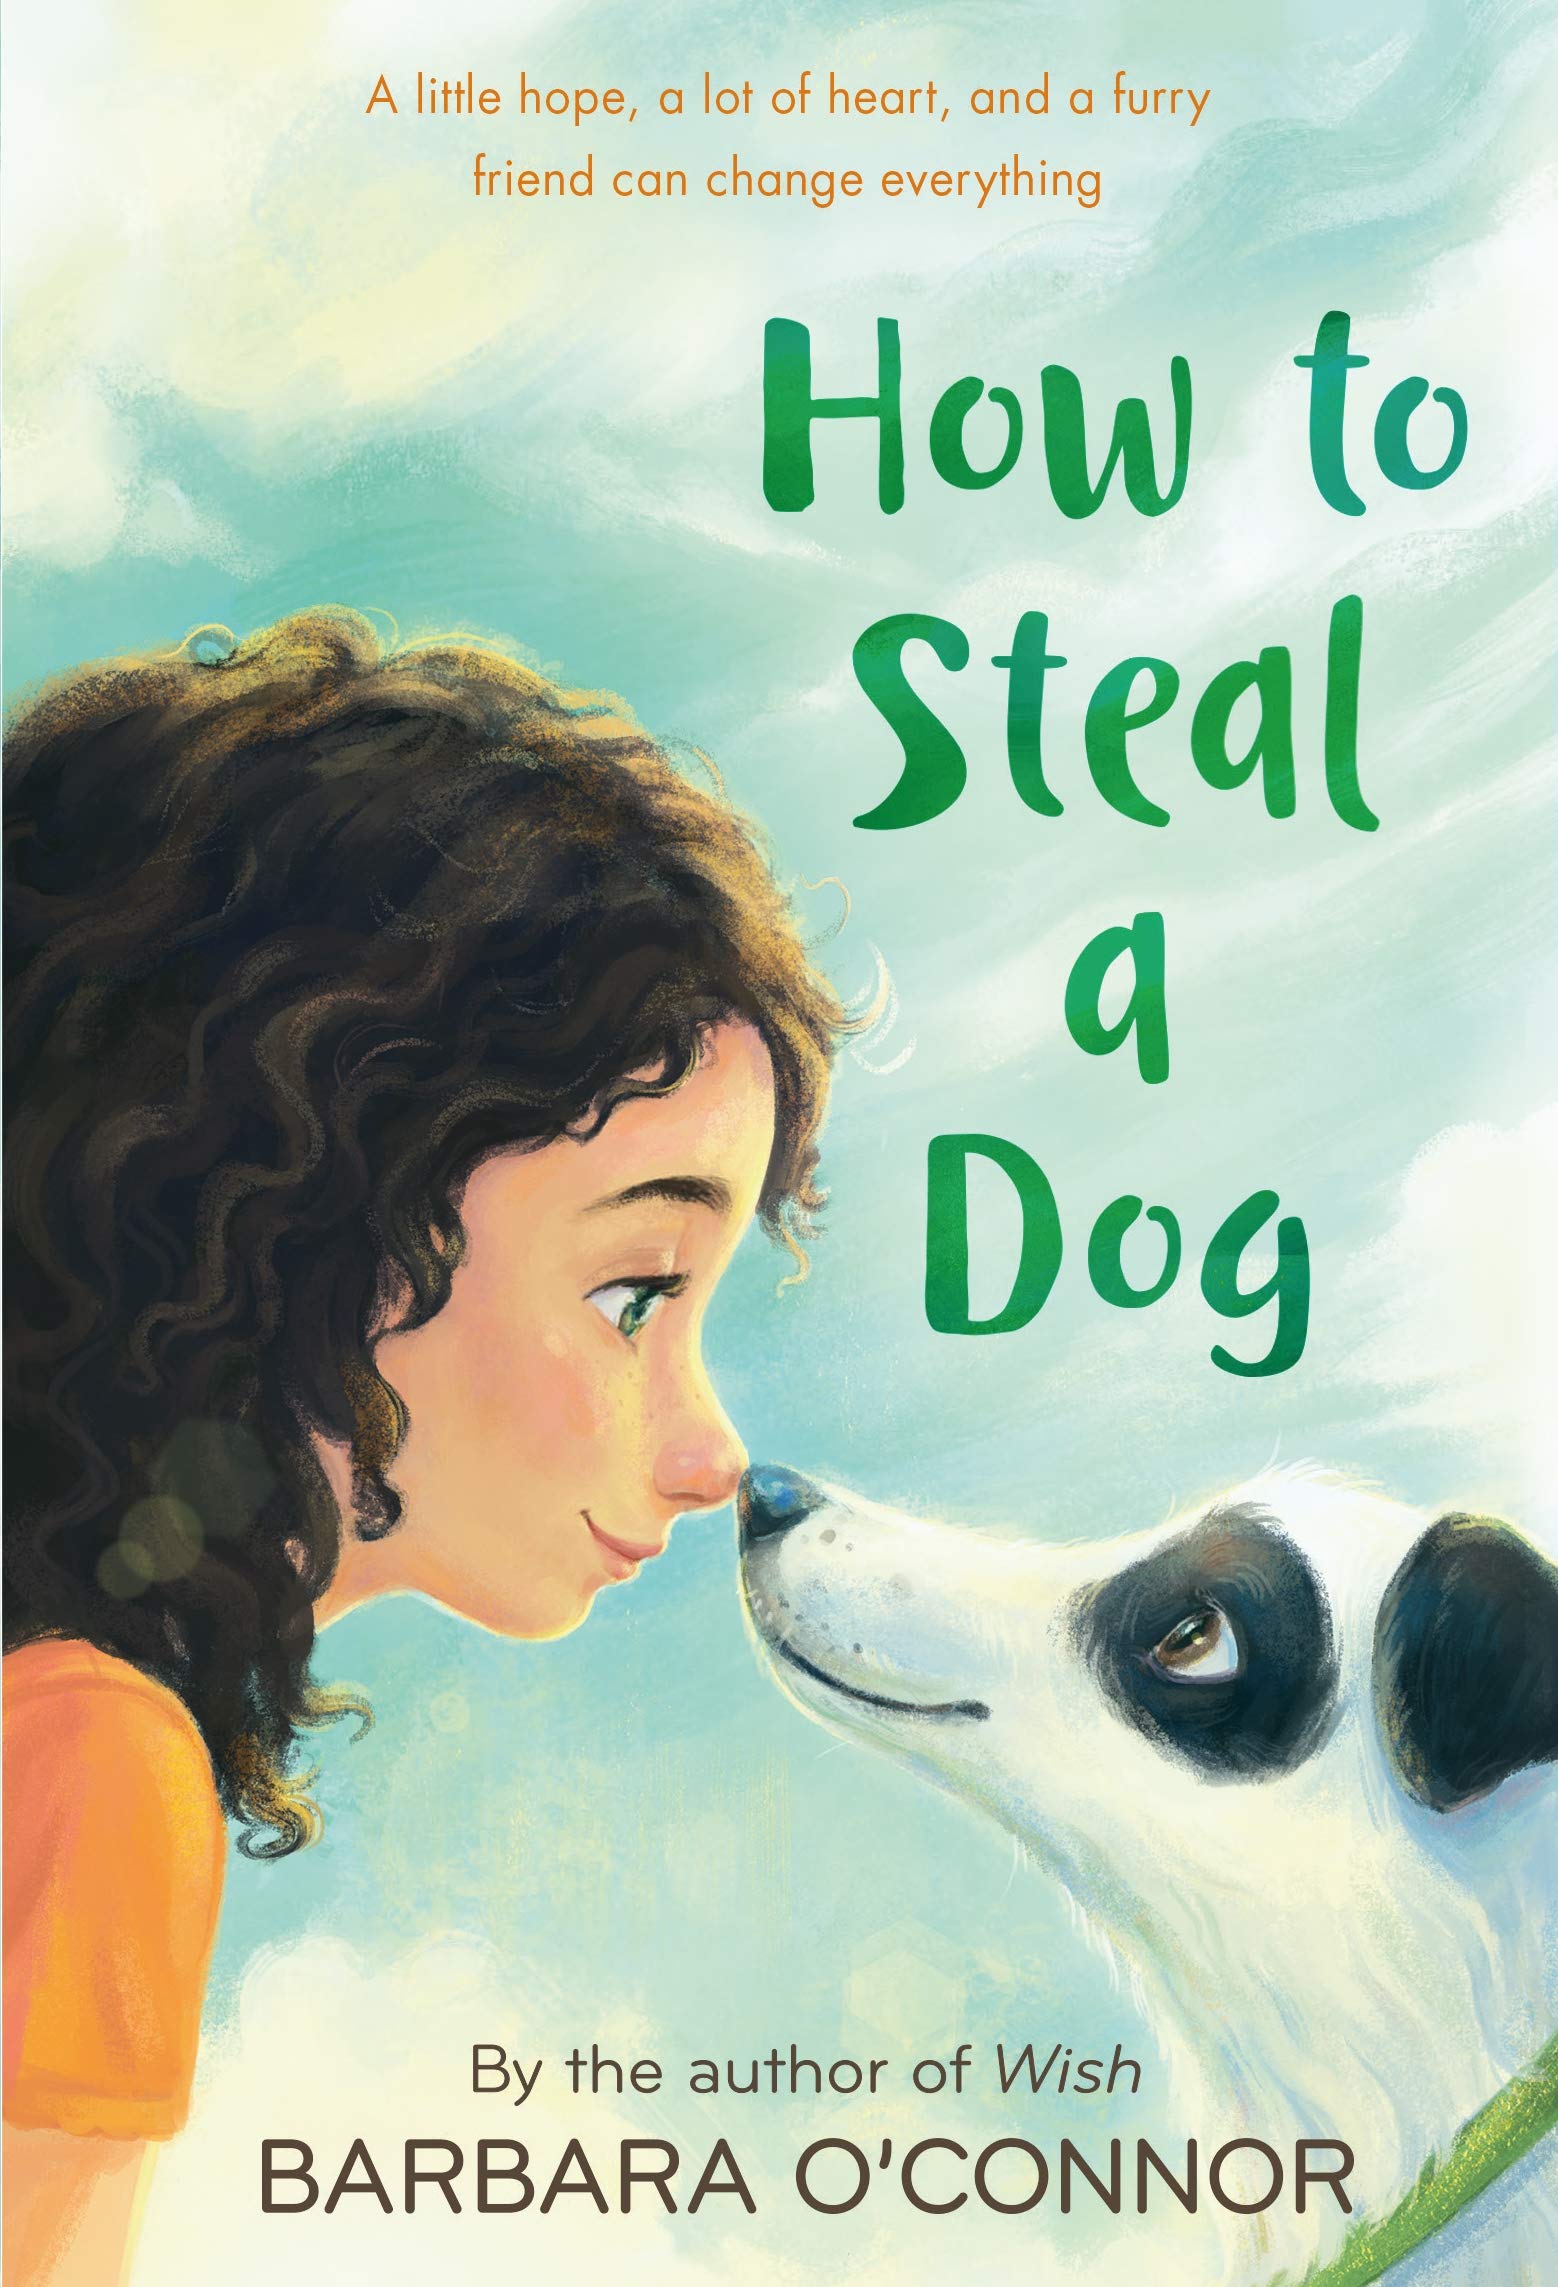 How to Steal a Dog by Barbara O’Connor